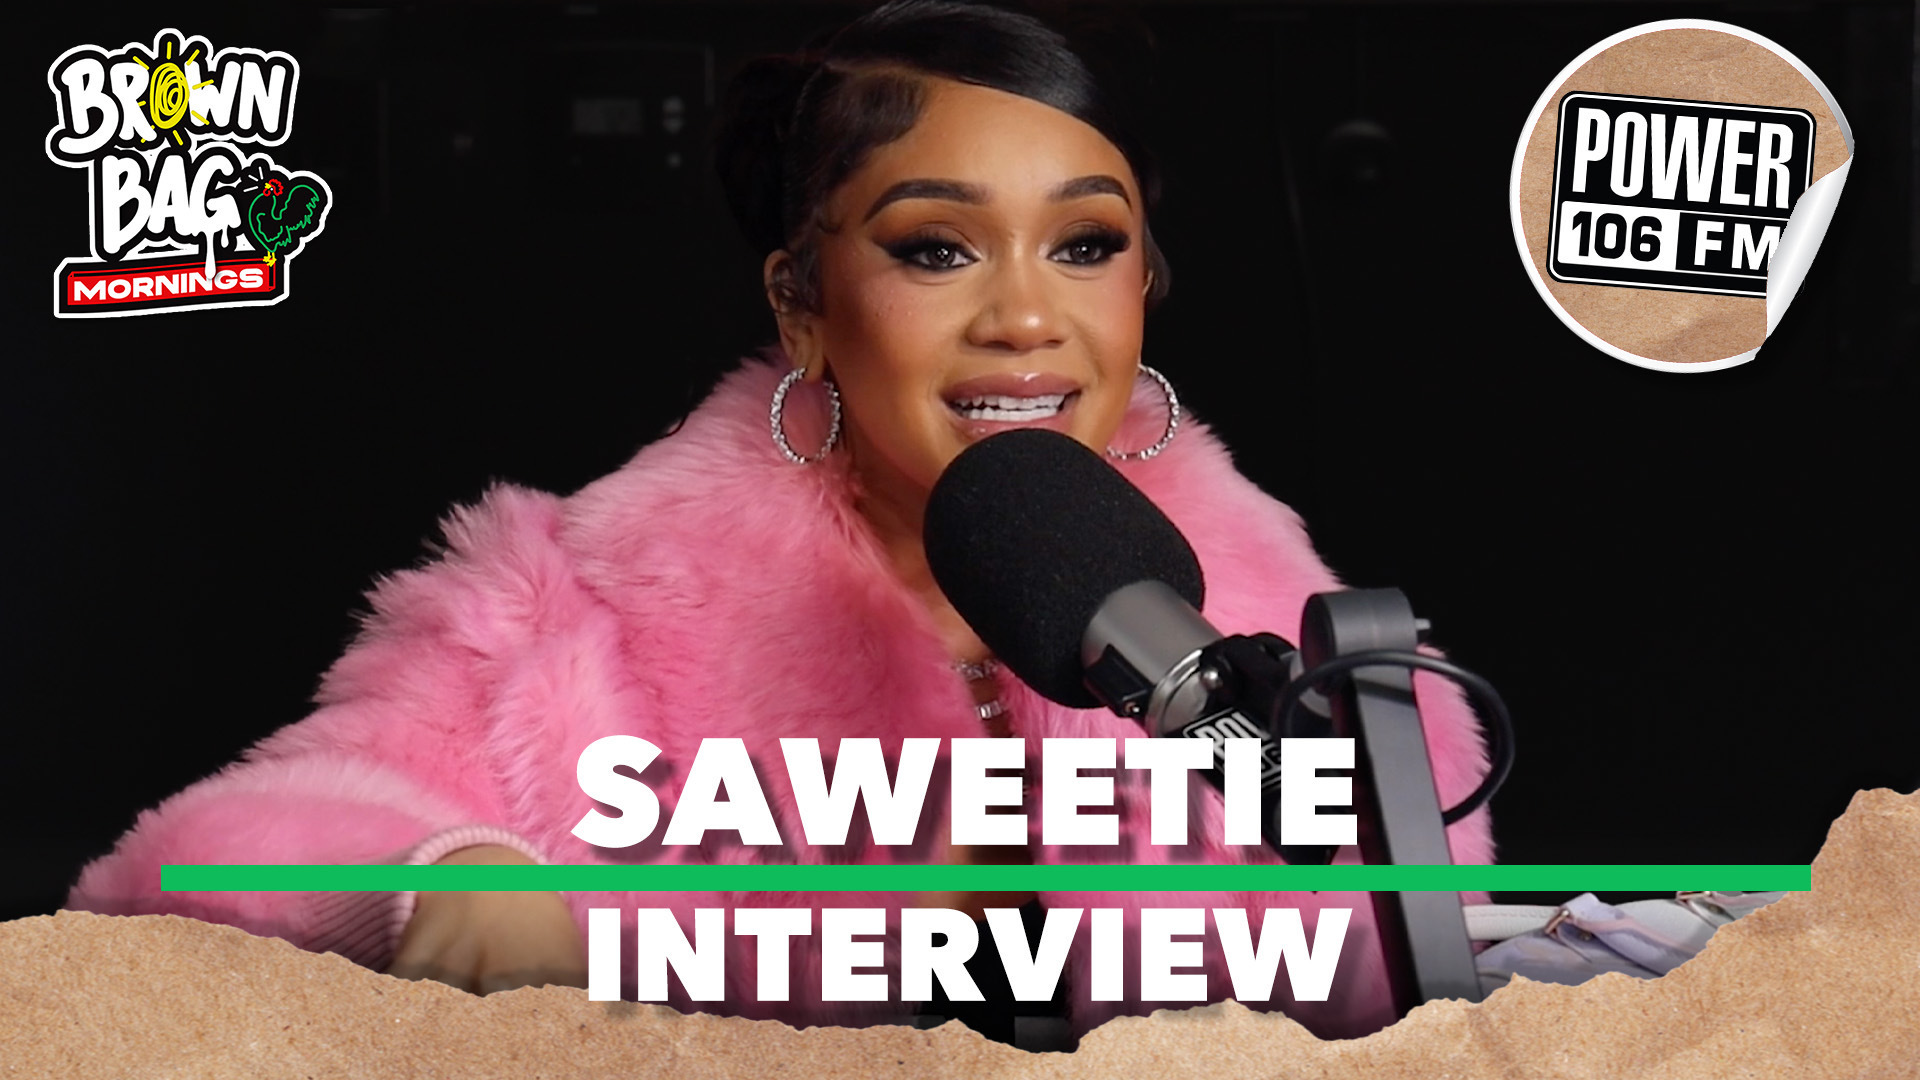 Saweetie Gets Emotional Talking About Living In Her Car, New Music & Her Favorite LA Food Spots